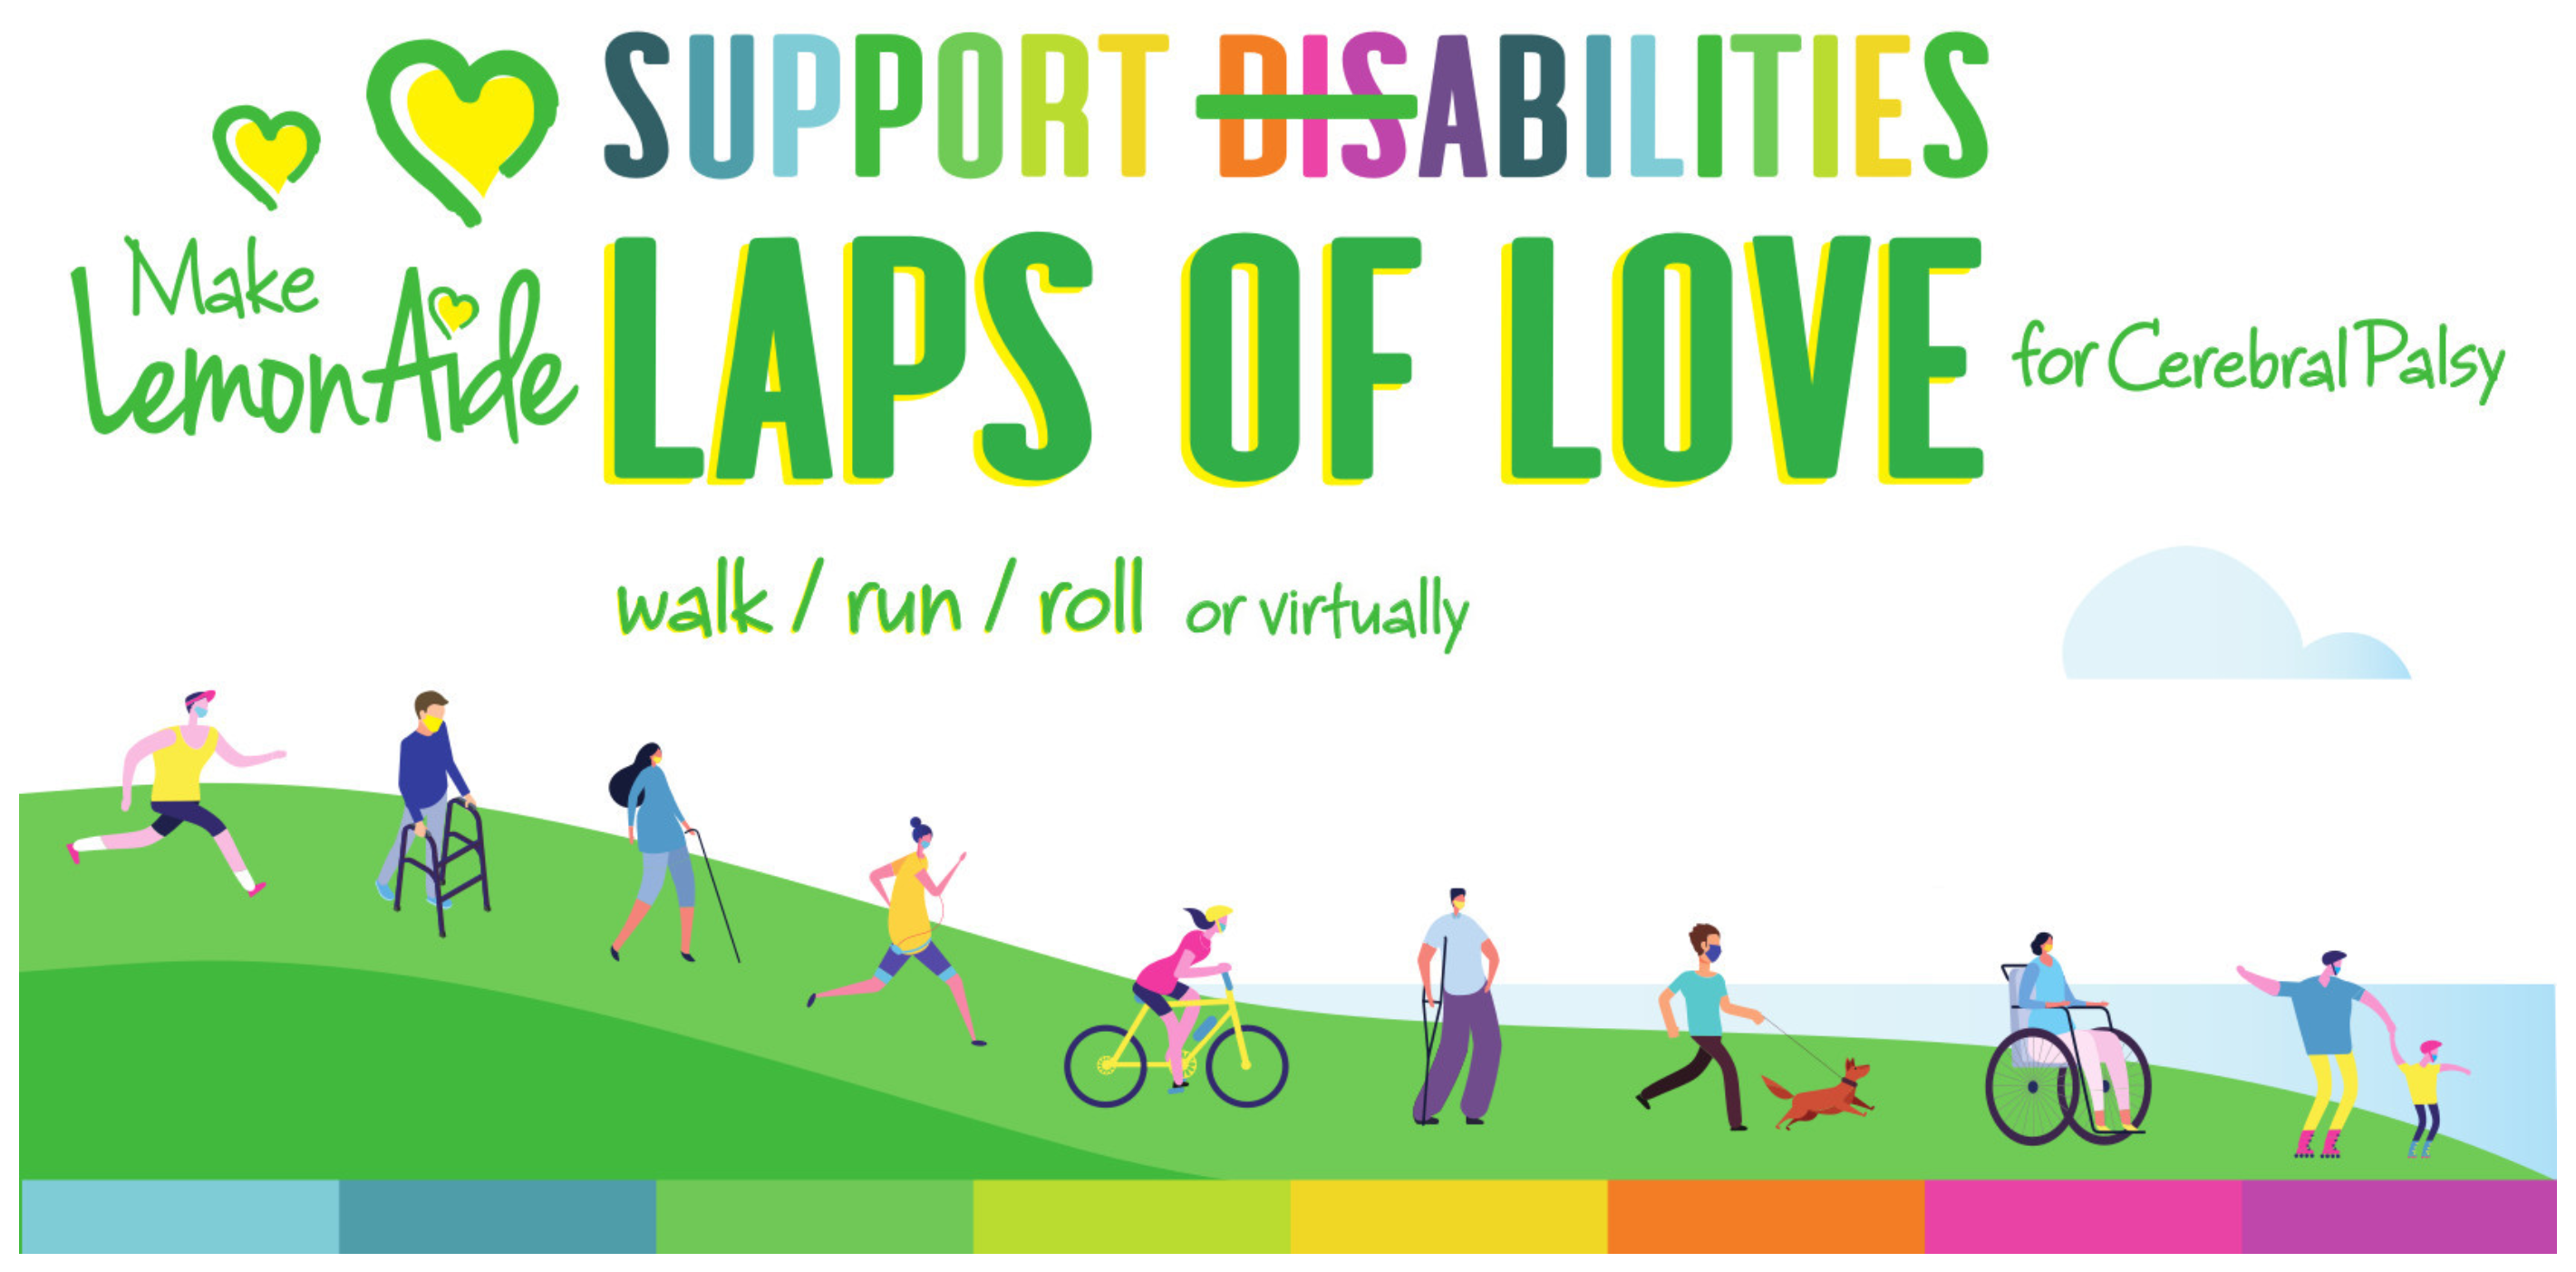 Laps of Love in Buffalo, NY - Details, Registration, and Results